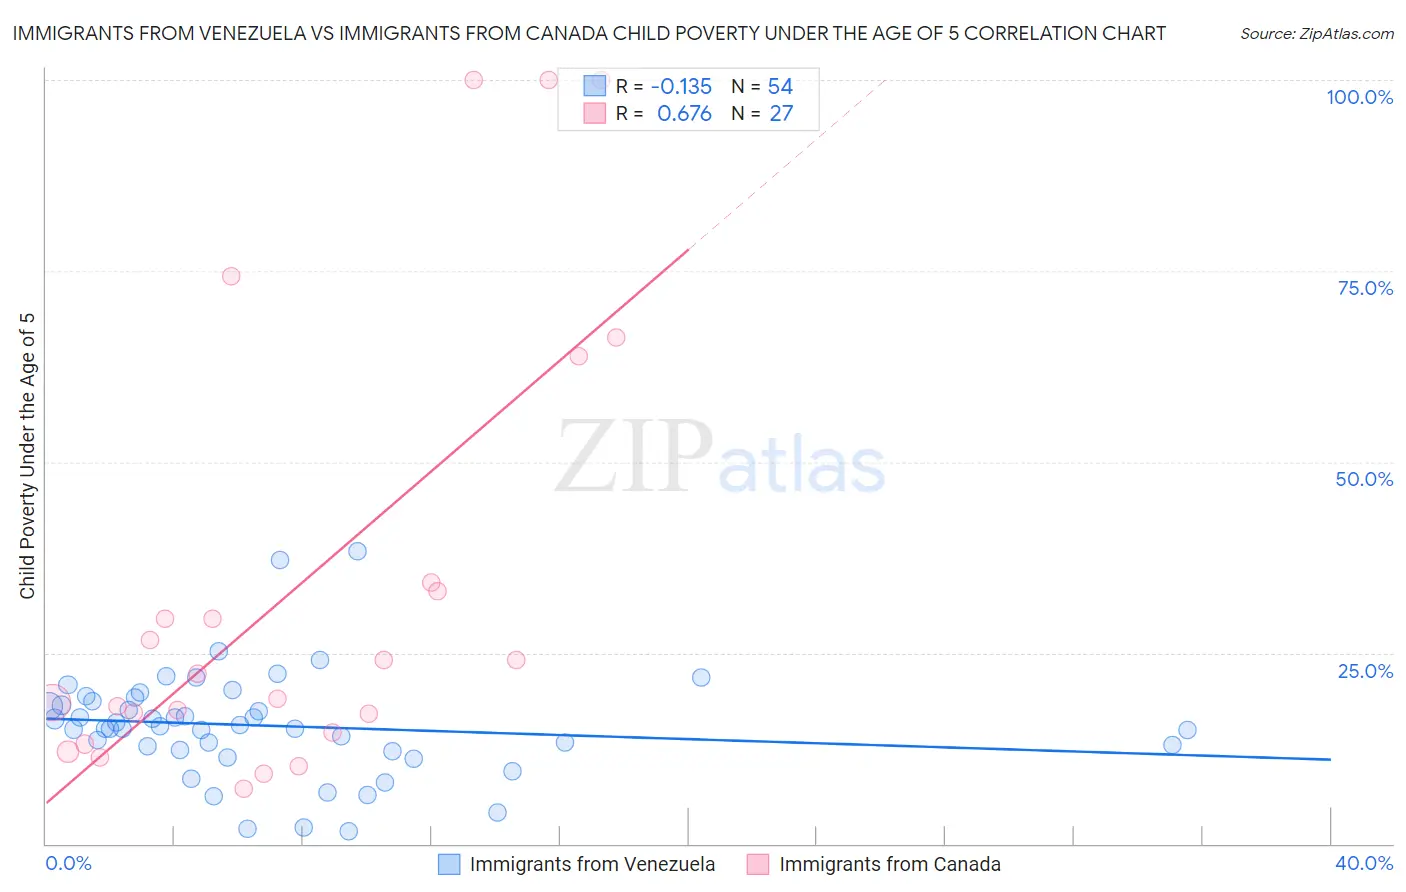 Immigrants from Venezuela vs Immigrants from Canada Child Poverty Under the Age of 5